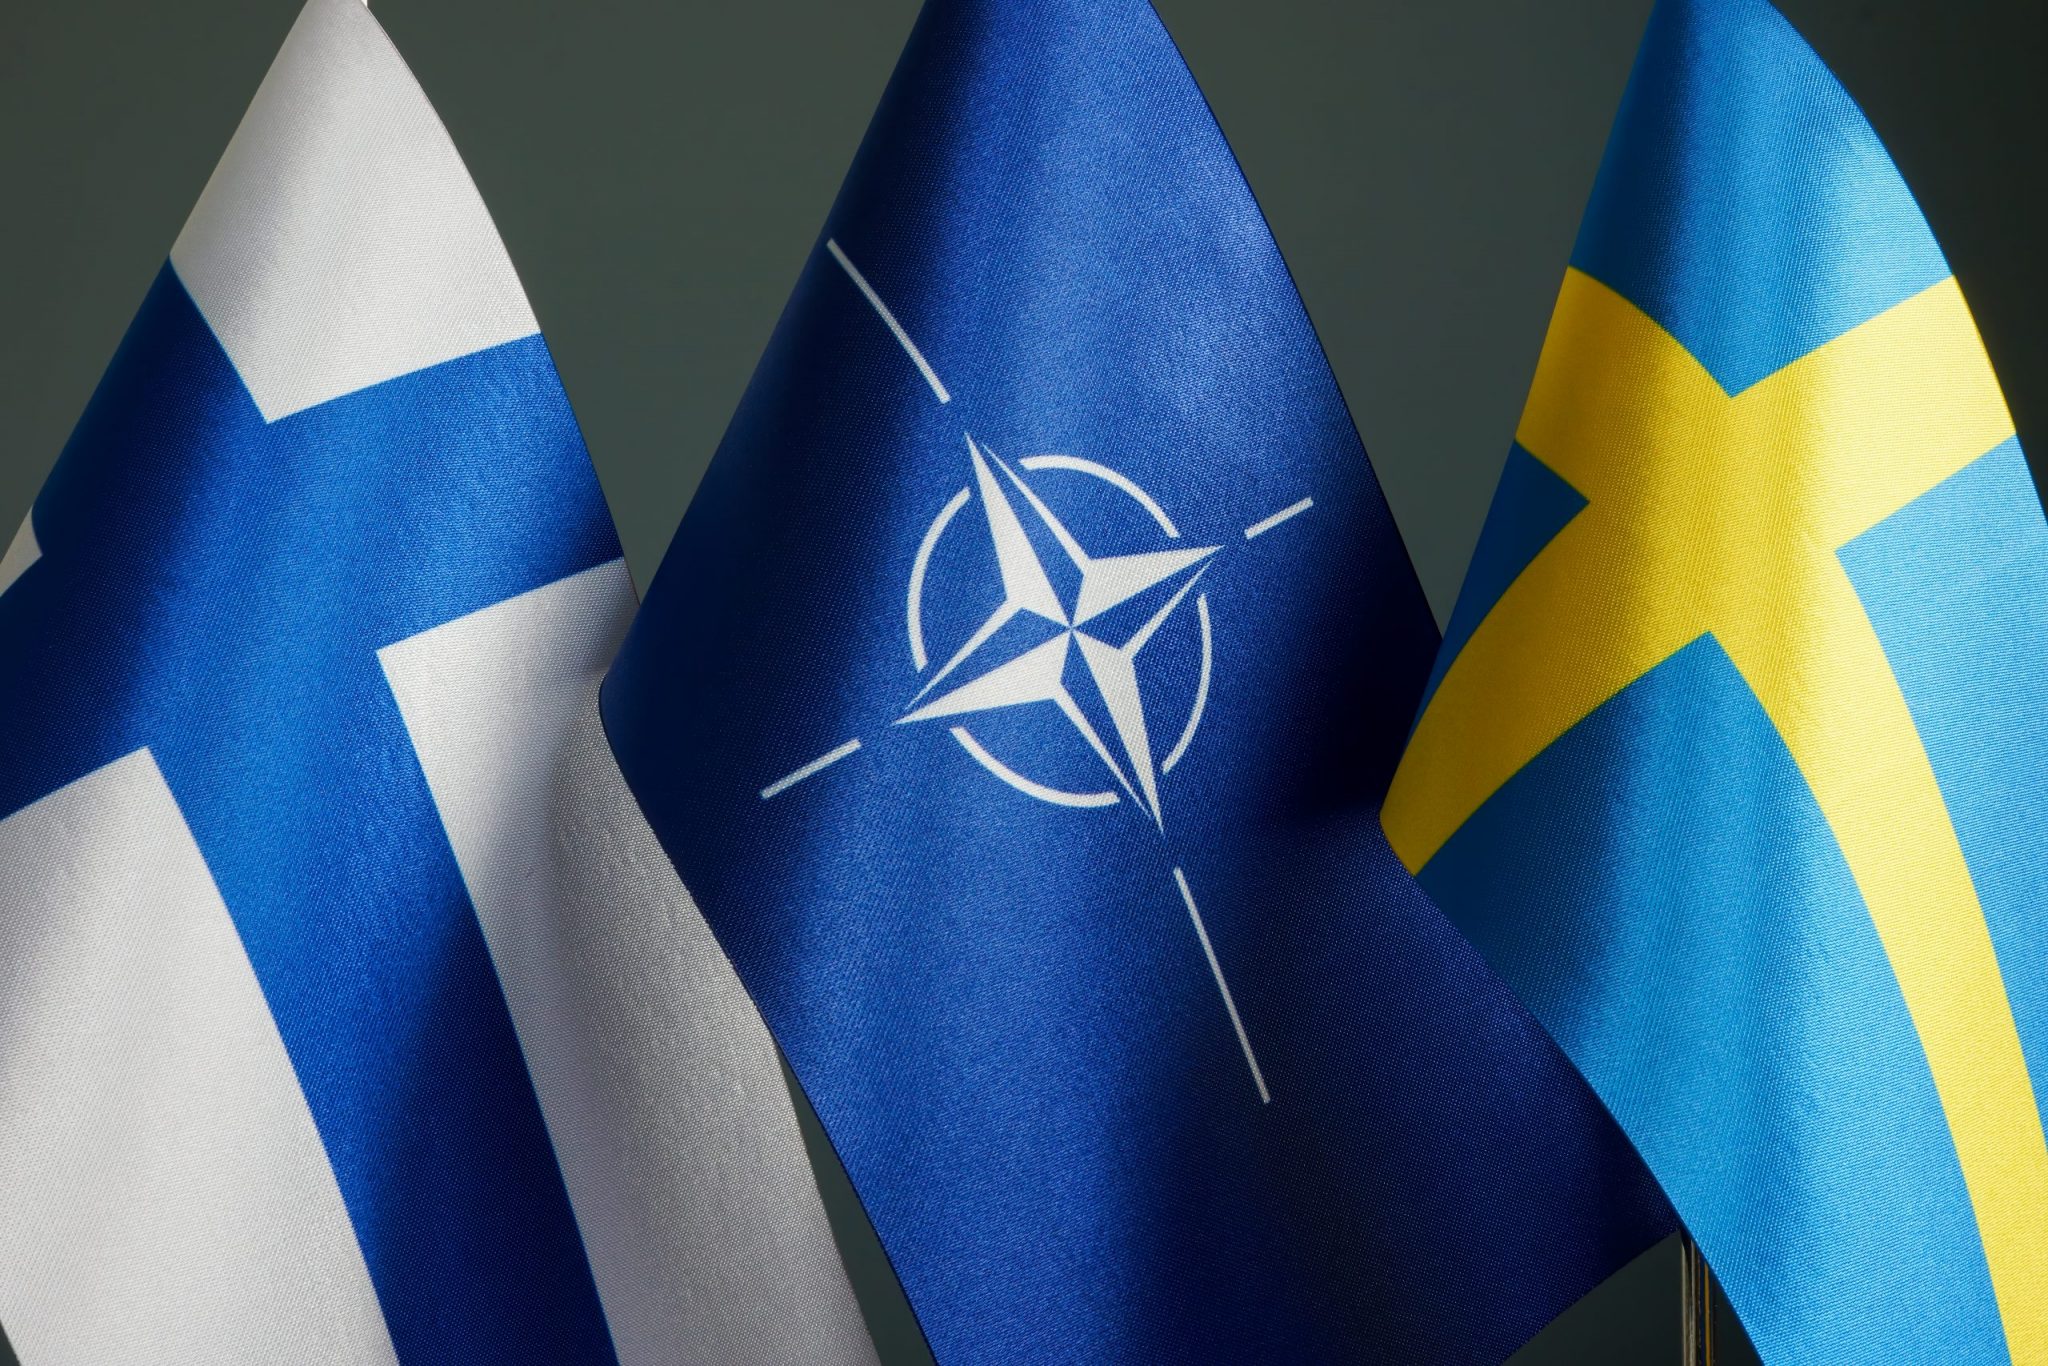 Flags of Sweden, Finland and NATO.